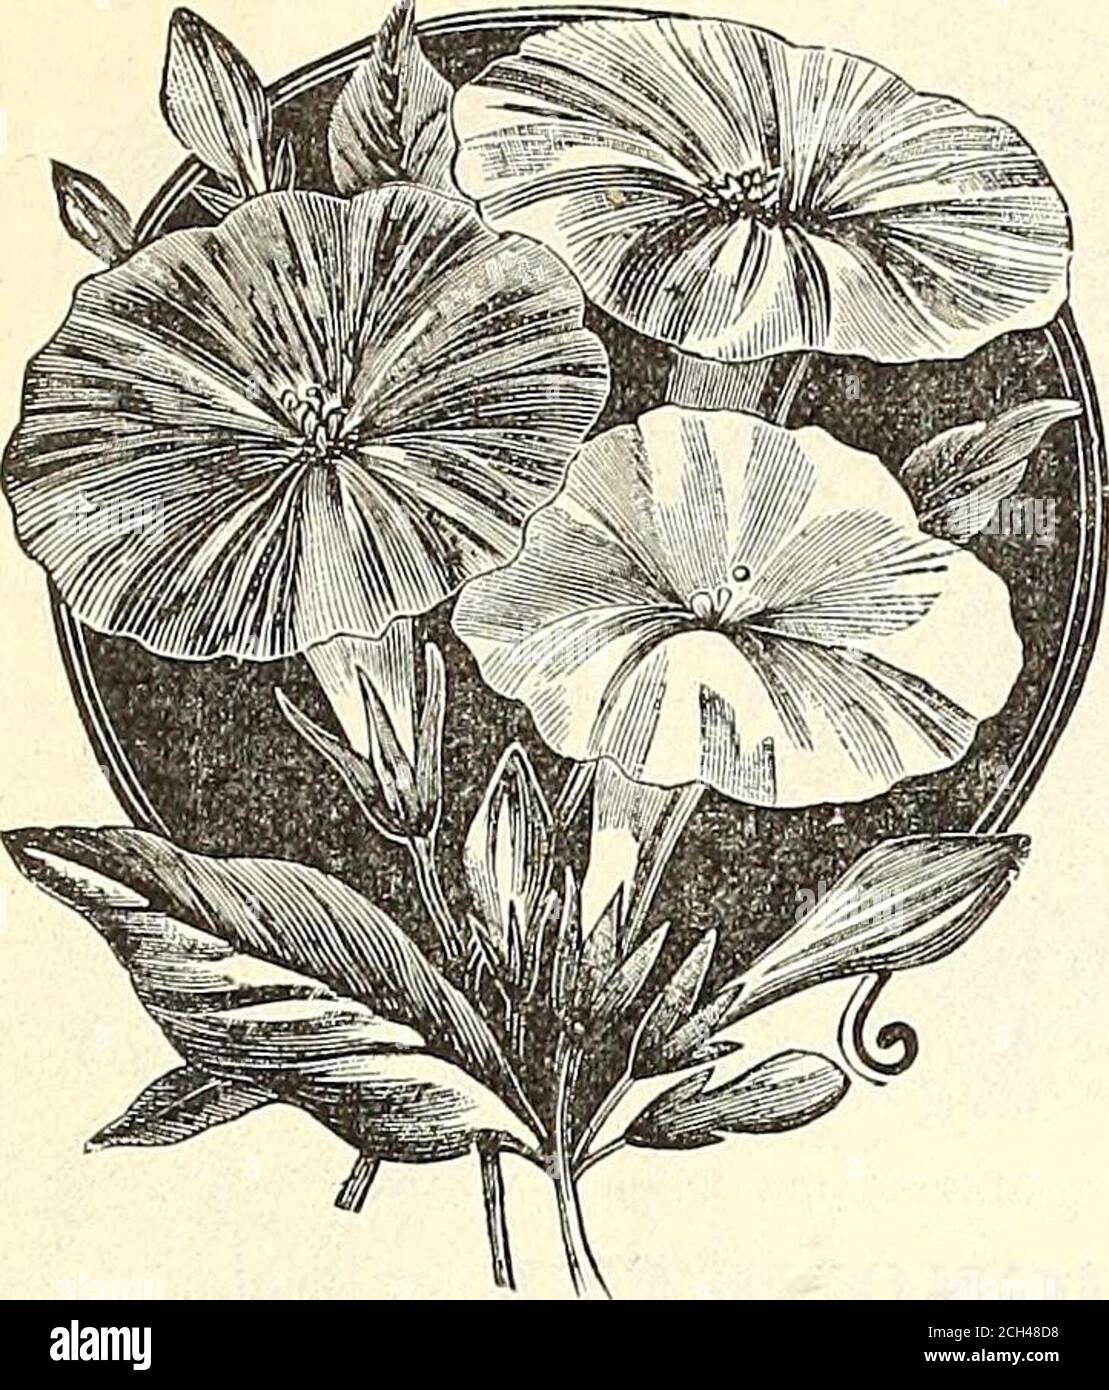 . Dreer's garden 1902 calendar . 87. LOPHOSPERMUM. ^^^^^^ 3041 Scandens. Highly ornamental annual climber,with showy, rosy-purple foxglove-like flowers; 10feet 10 I^UPINUS. 3050 nixed Annua). Orna-mental f y e e-Howering,easily-grown annual,with long, gracefulspikes of rich and vari-ous-colored pea-shapedflowers; valuable formixe&lt;l flower bordersand beds ; 2 feet. Peroz., 25 cts 5 Marvel op Peru. I.YCHNIS. Handsome plants of easyculture, growing in any rich gar-den soil; for massing in beds andborders, blooming the first year ifsown early; hardy perennials. 3061 Chalcedonica (Rose Campion, Stock Photo